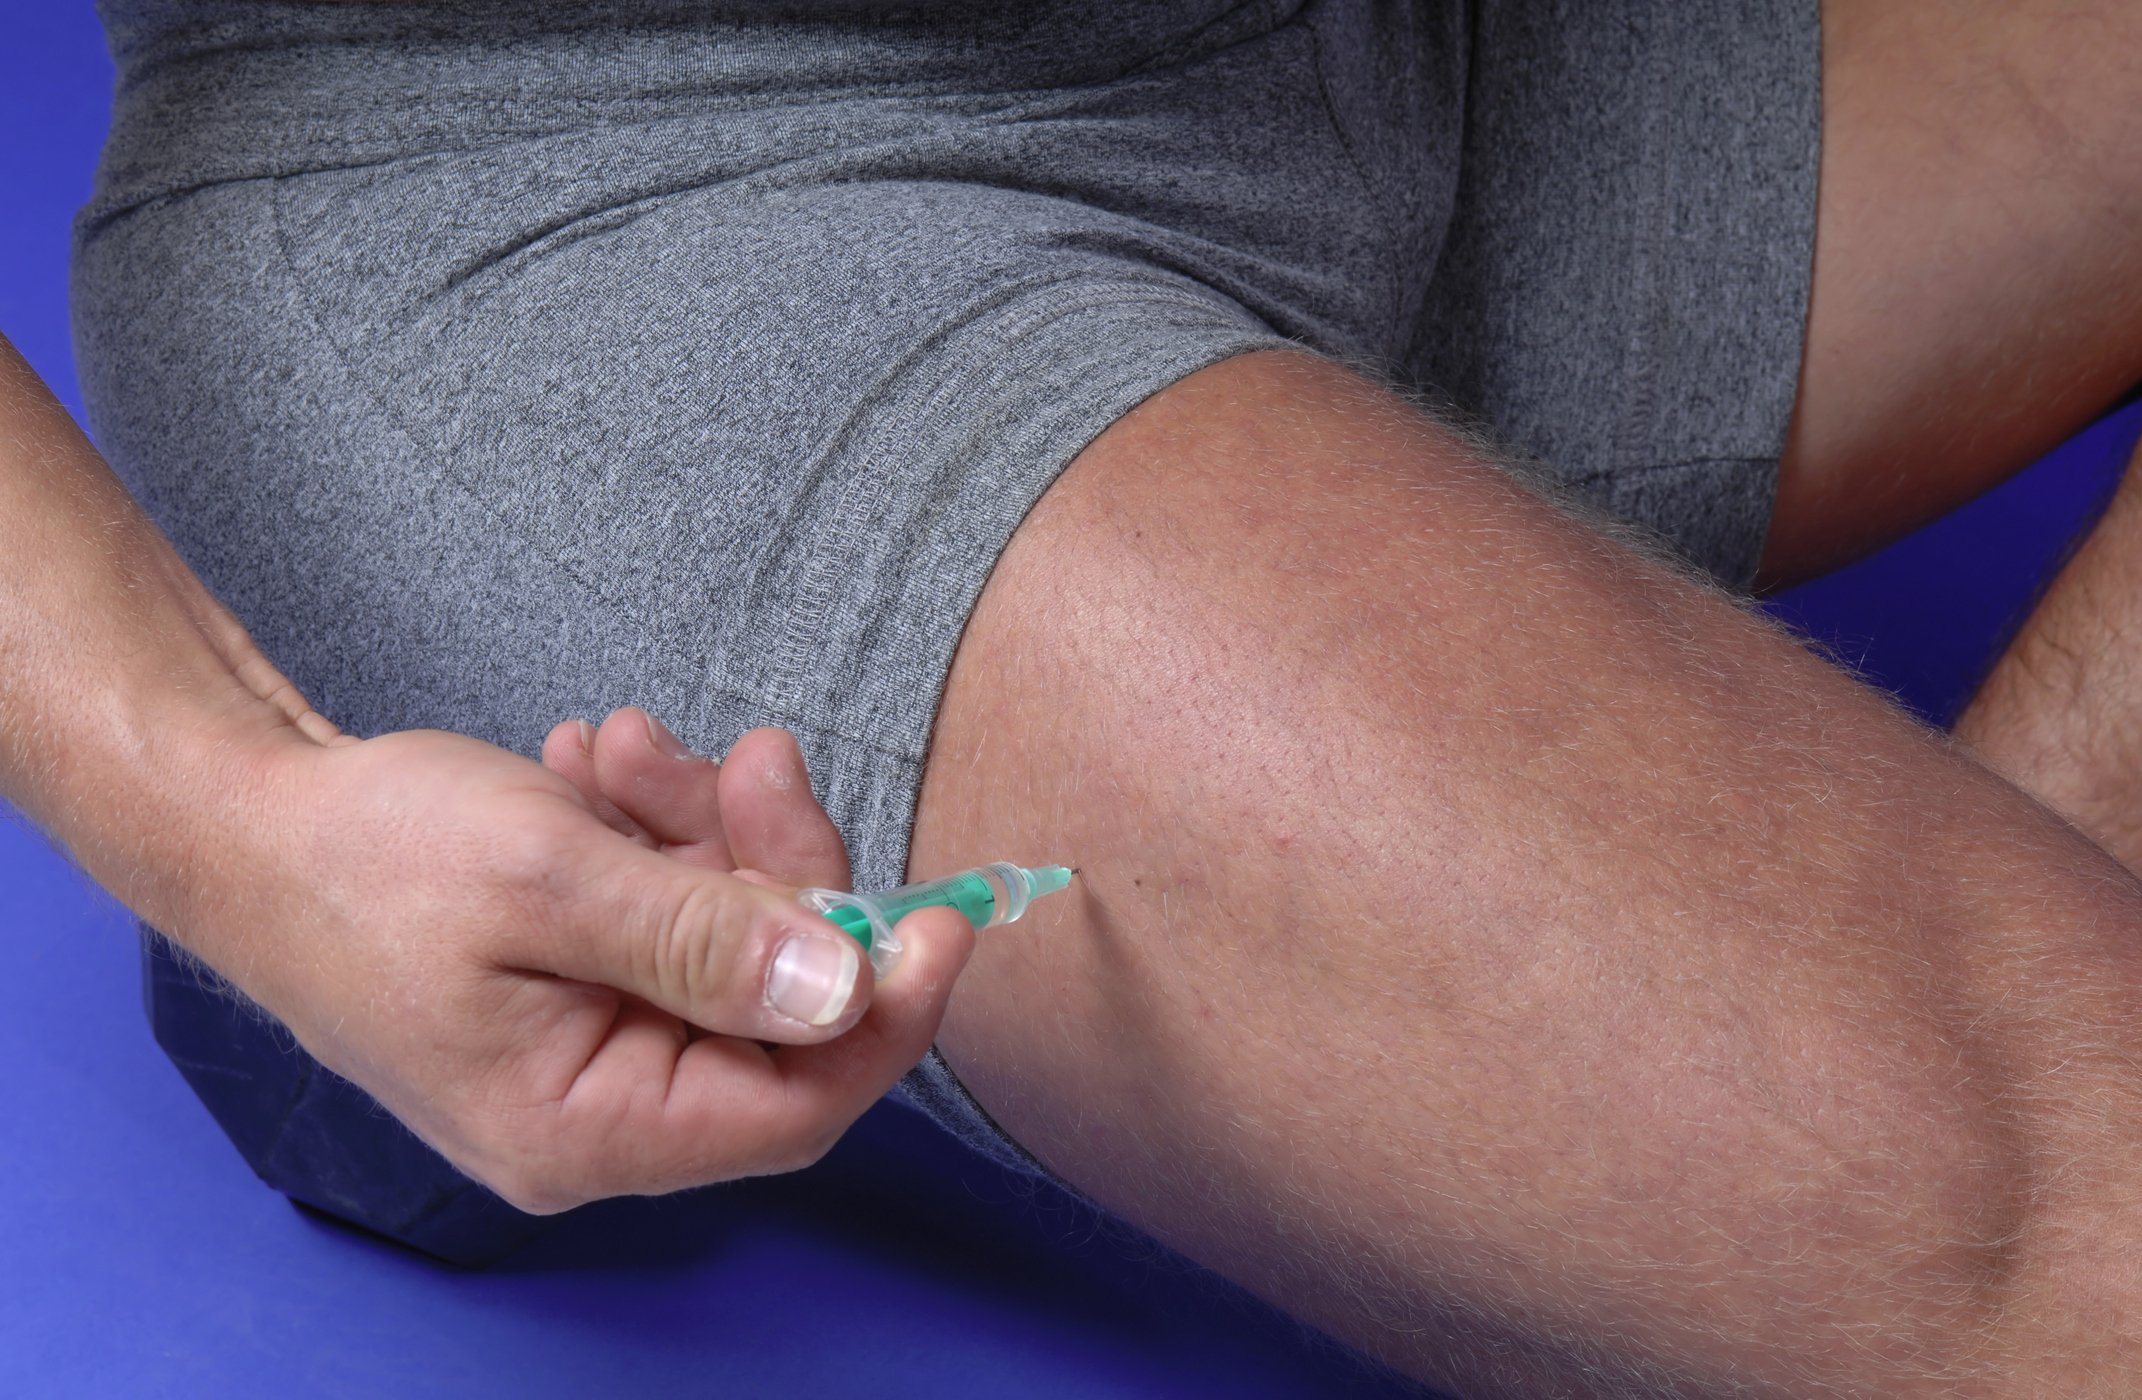 testosterone injections and prostatitis